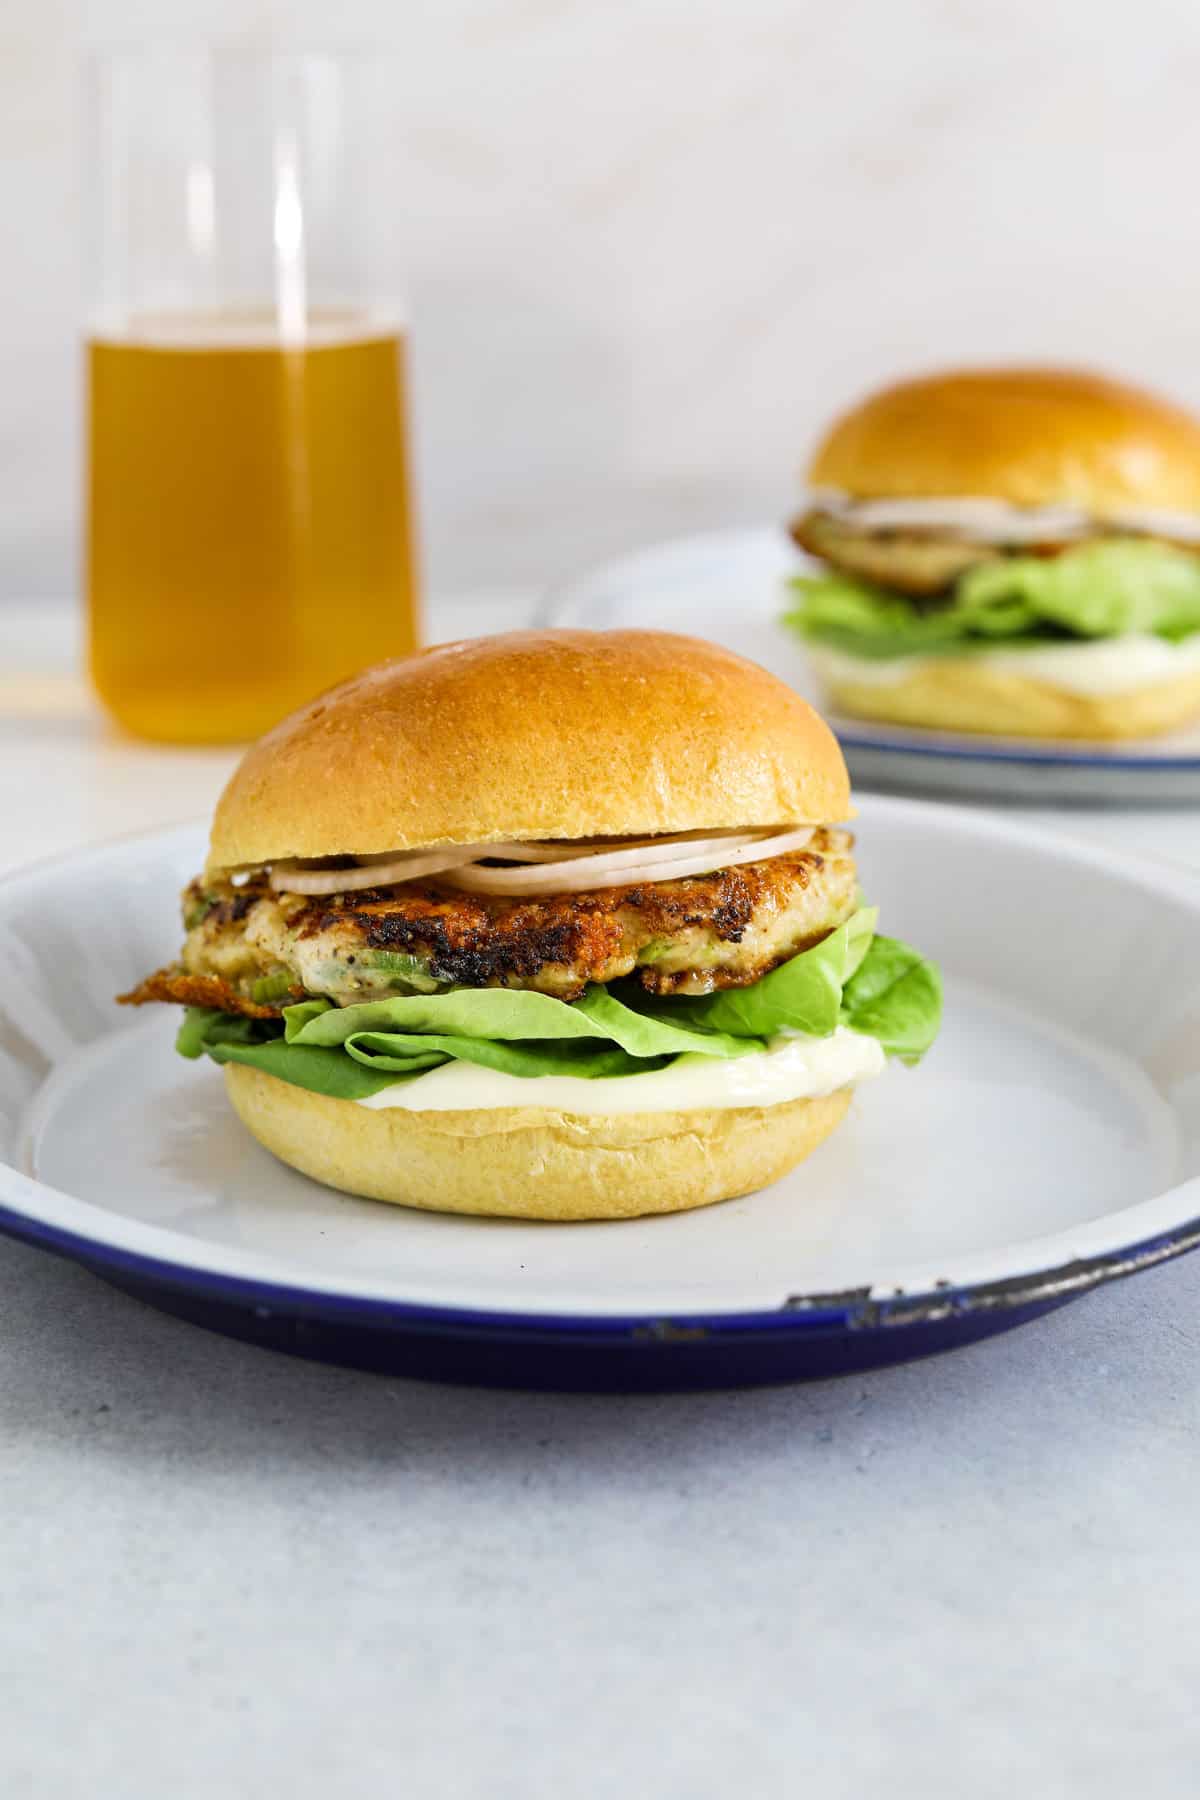 A chicken burger with lettuce, mayo and onion on a brioche bun with a beer in the background.